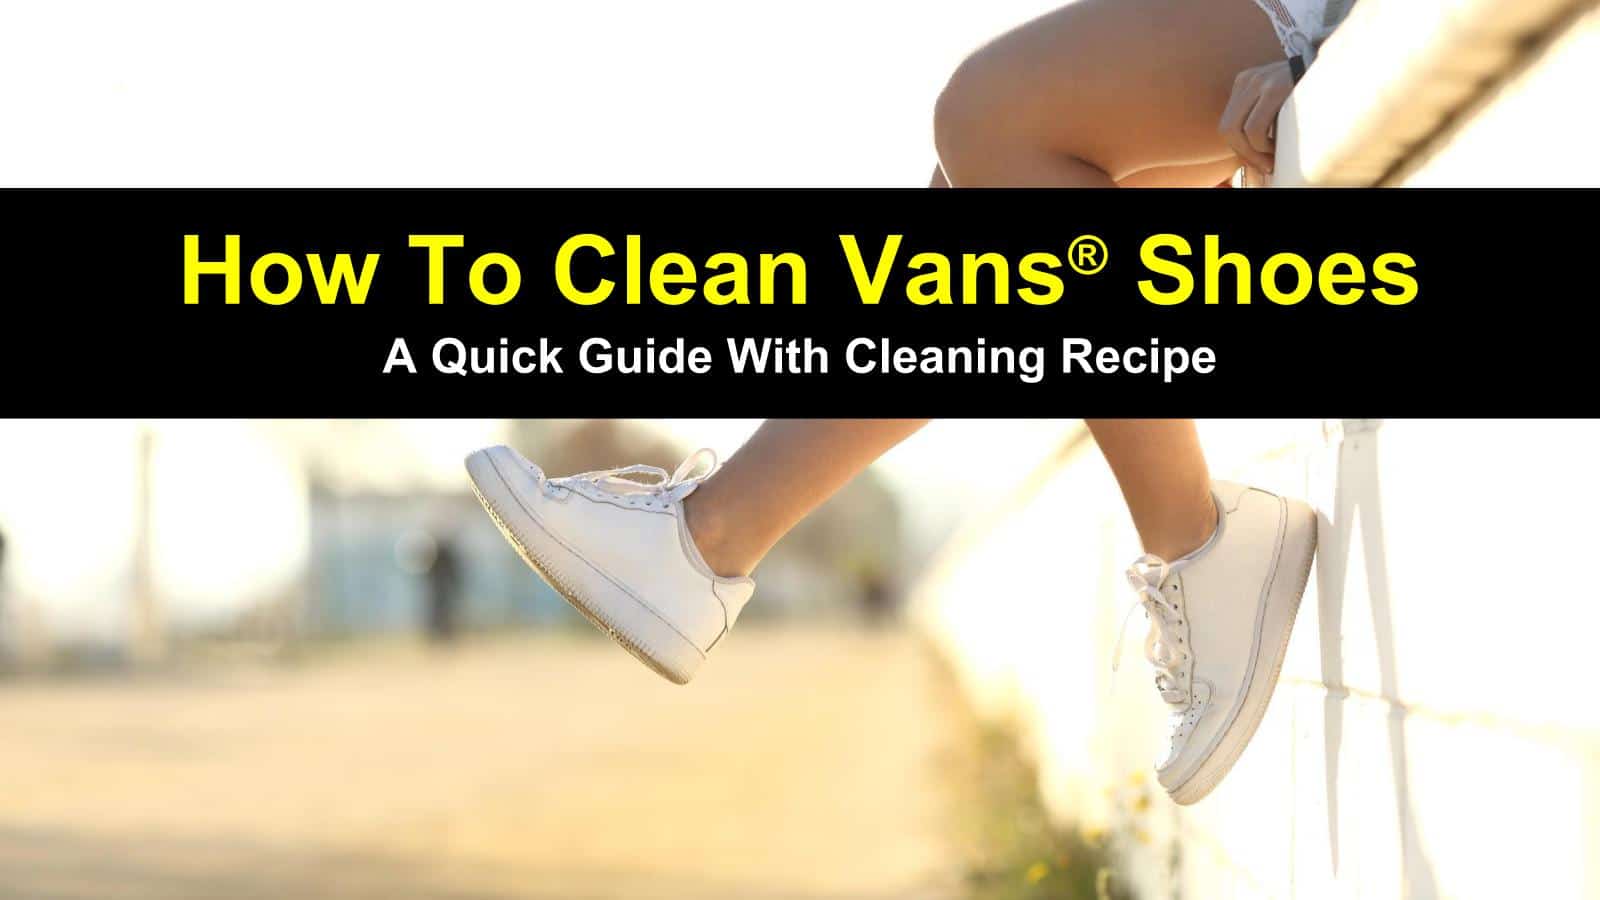 how do you clean pink vans